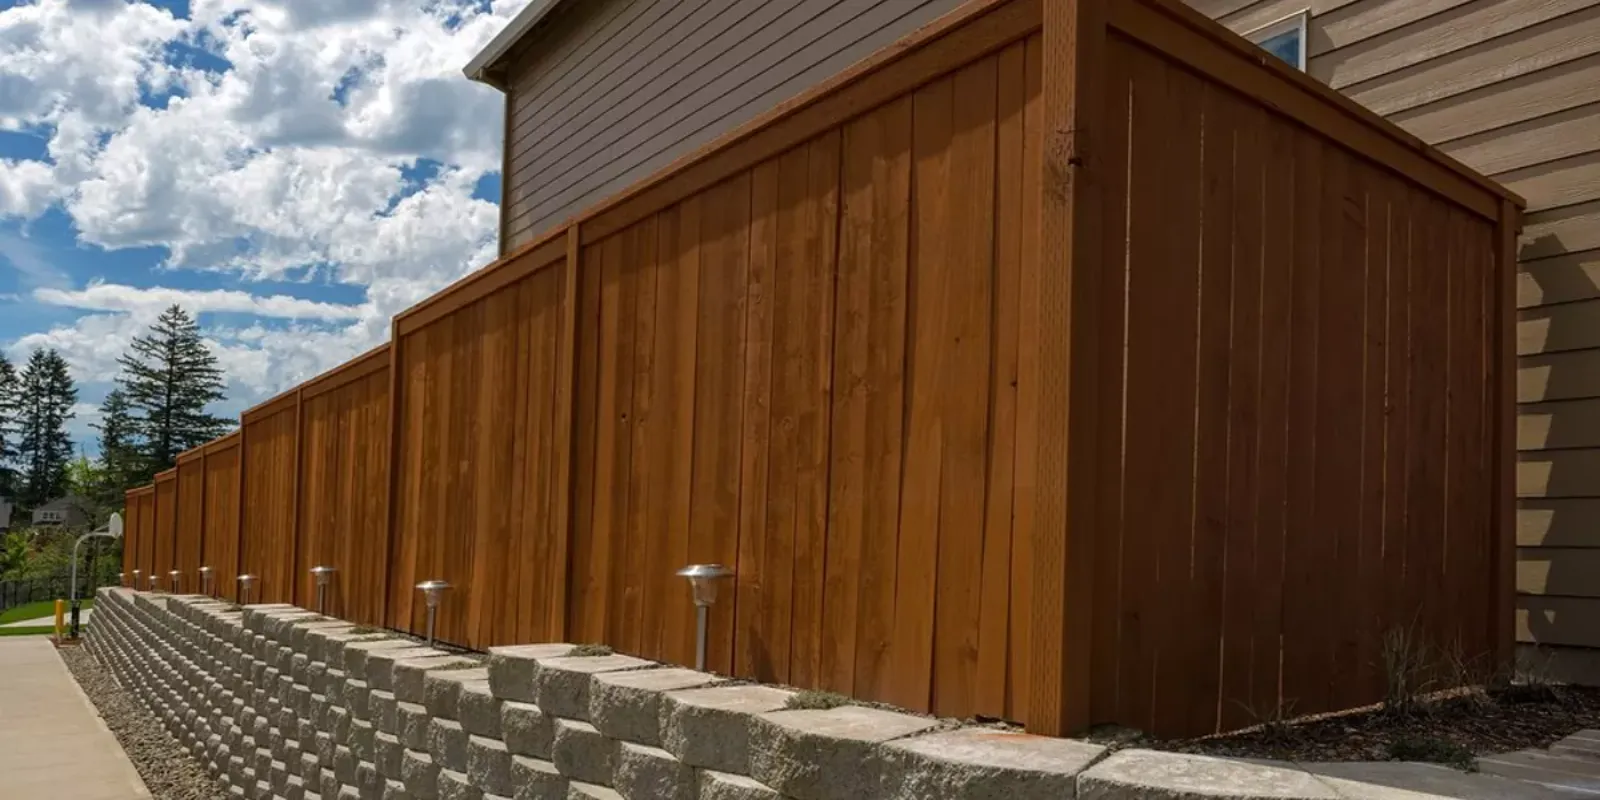 Is Uphill Neighbor Responsible for Retaining Wall? Discover the Truth